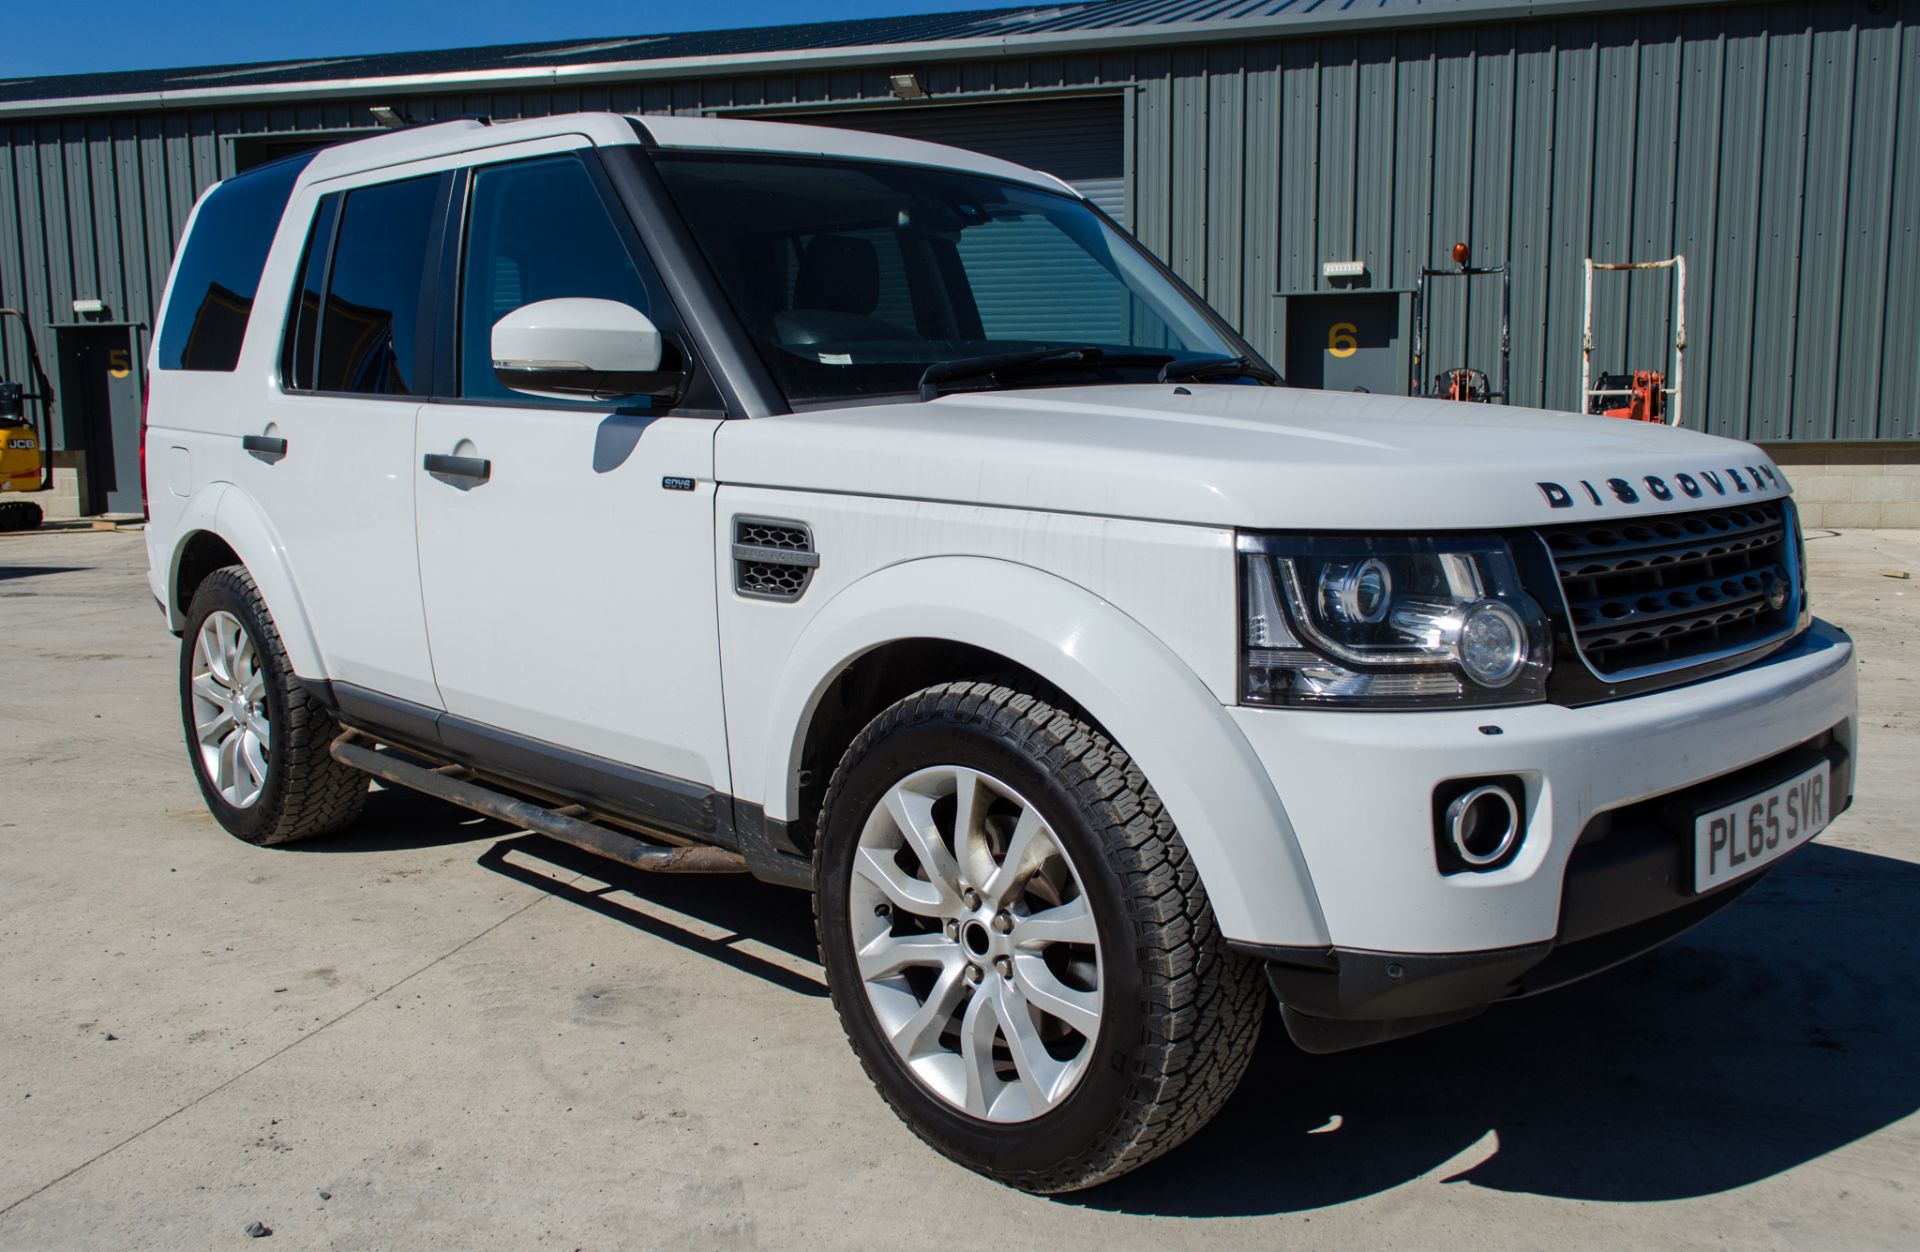 Land Rover Discovery 4 3.0 SE SDV6 Commercial 4x4 utility vehicle Reg No: PL65 SVR Date of - Image 2 of 32